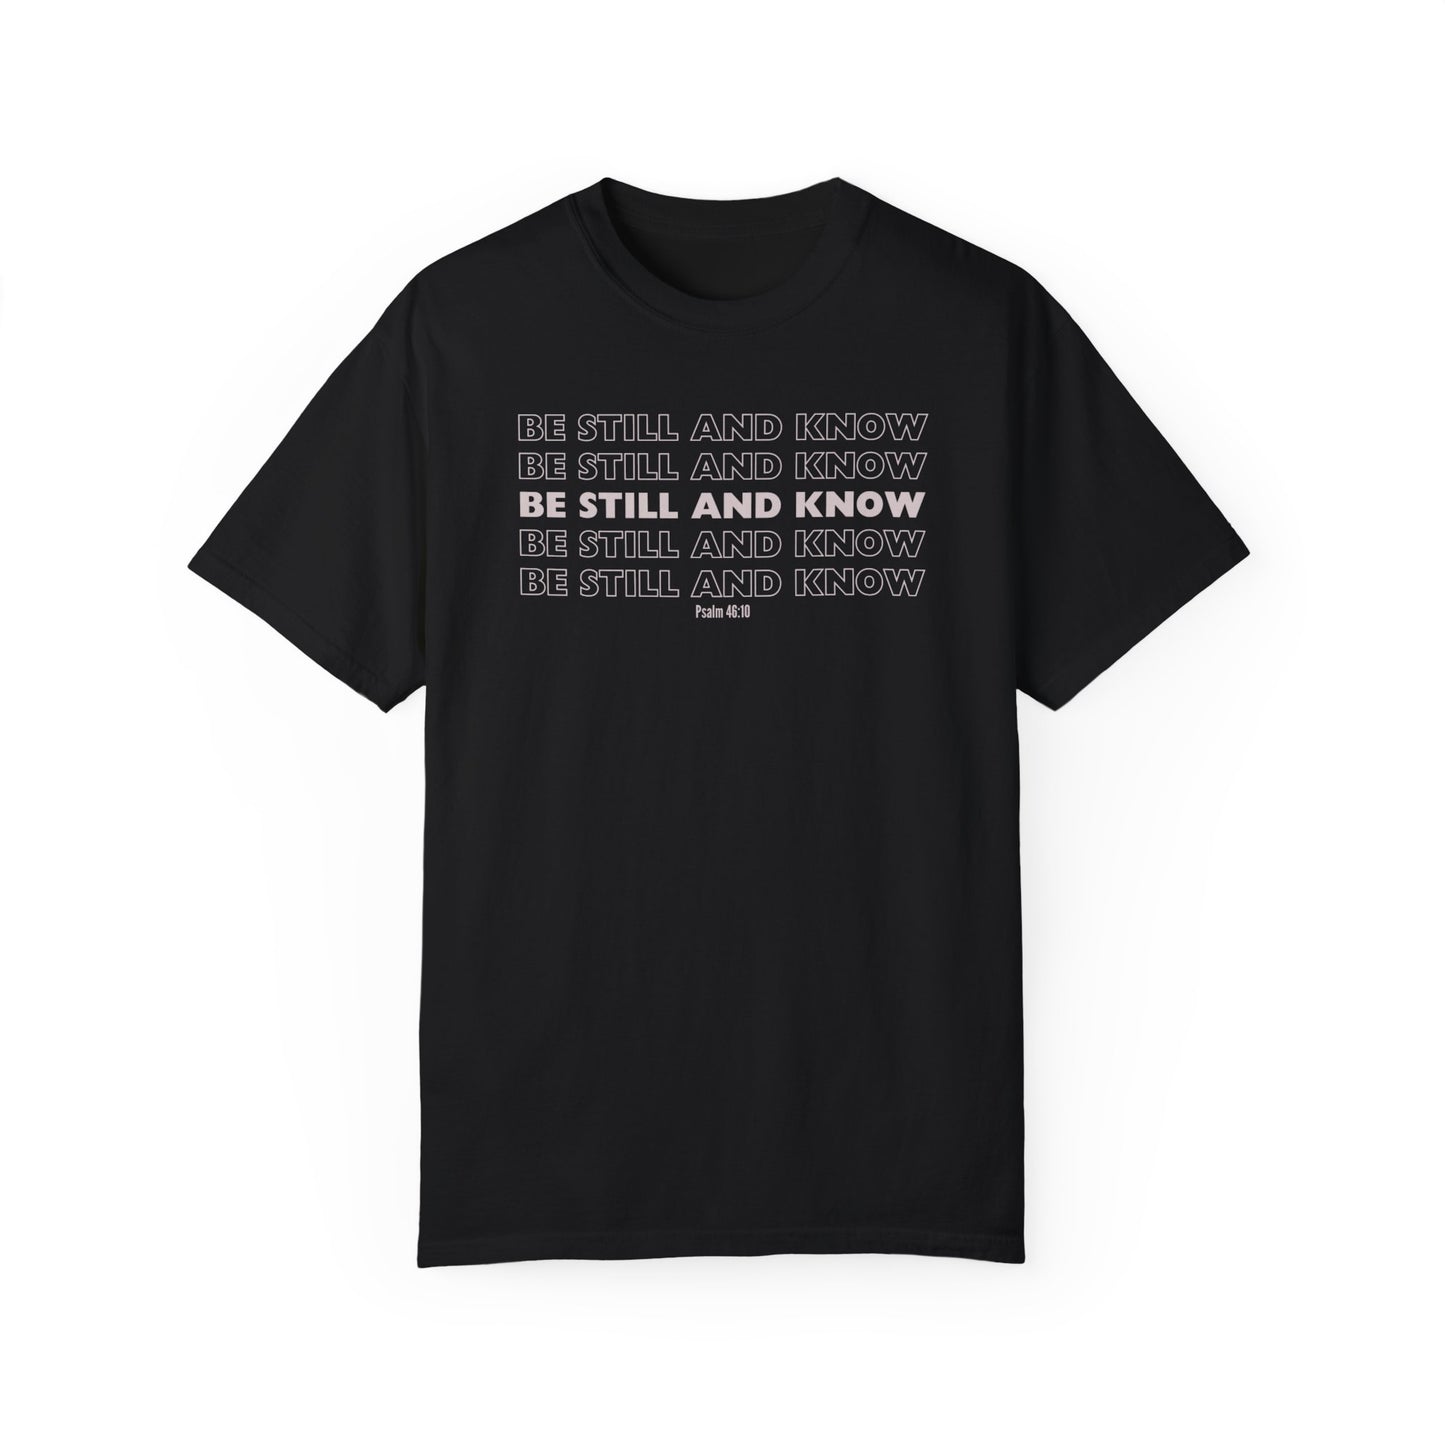 Be Still and Know Psalm 46:10 Bible Verse T-Shirt Oversize Shirt Hoodie Prayer Worship Bible Study Gift for Him Her Husband Wife Friend